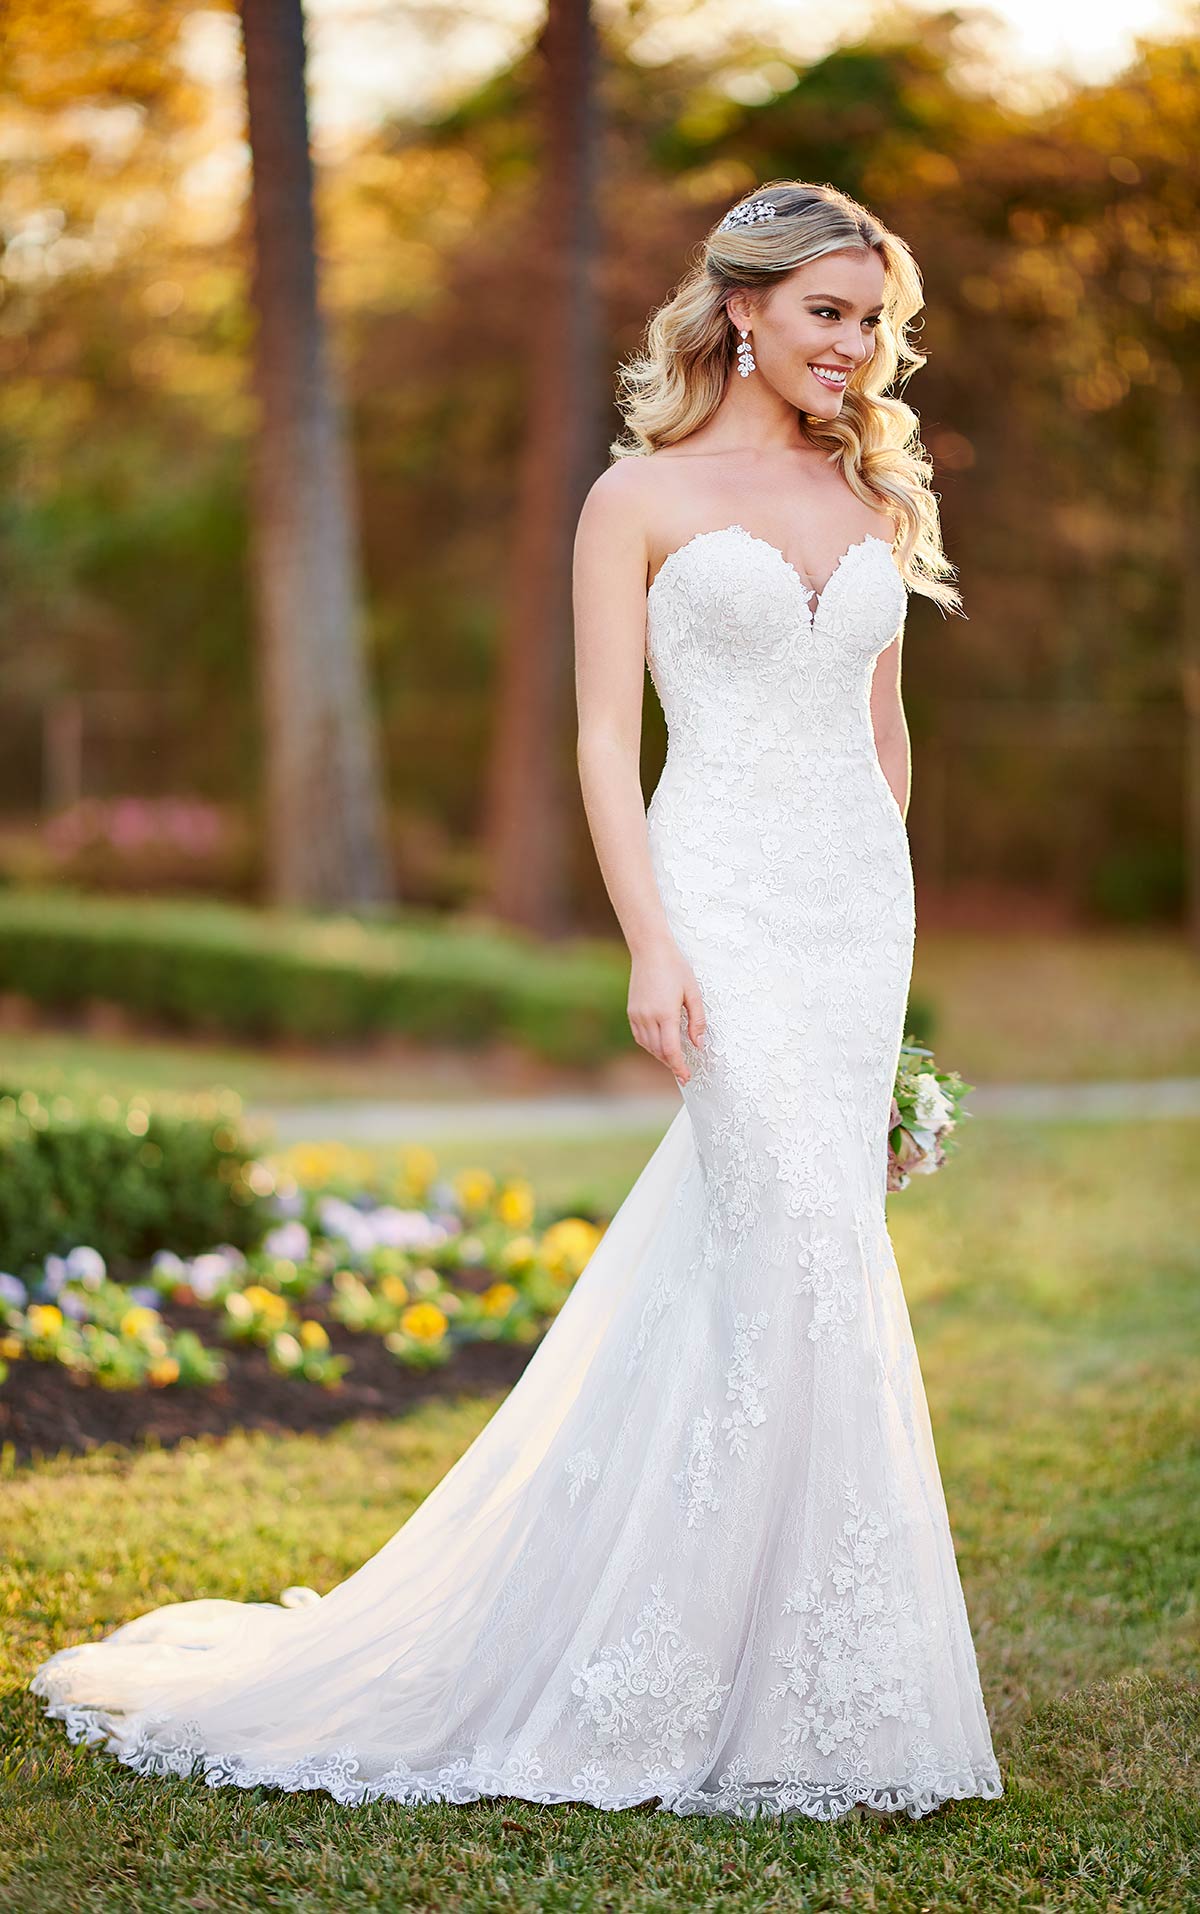 Strapless Wedding Dresses & Gowns